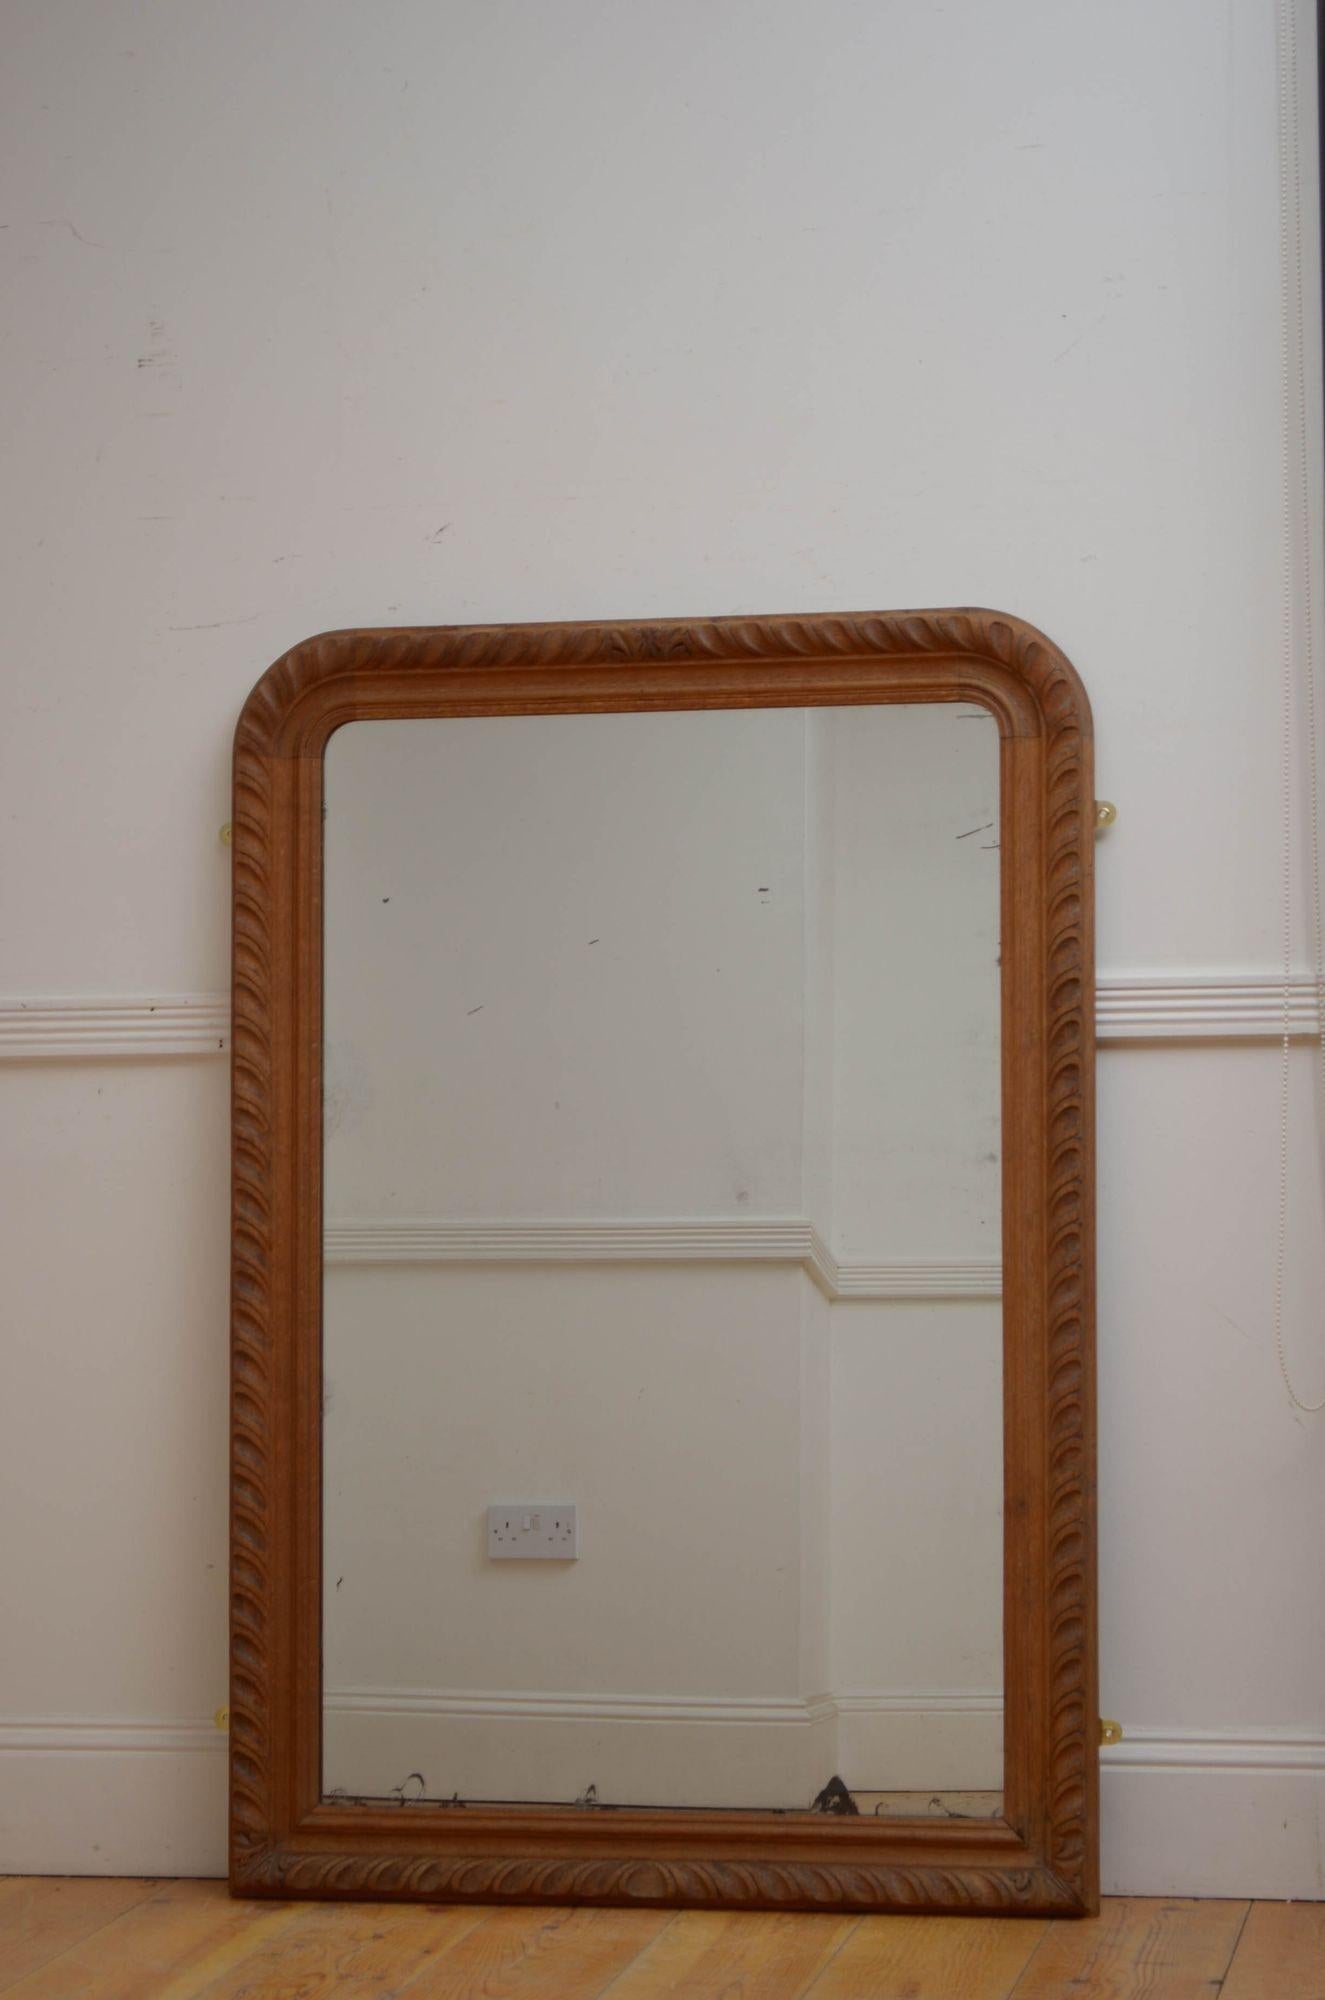 Sn5366 Attractive Louis Philippe wall mirror in oak, having original foxed glass in oak gadrooned carved frame. This antique mirror retains its original glass, good oak frame and replacement back, all in home ready condition. c1850
Measures: H 51